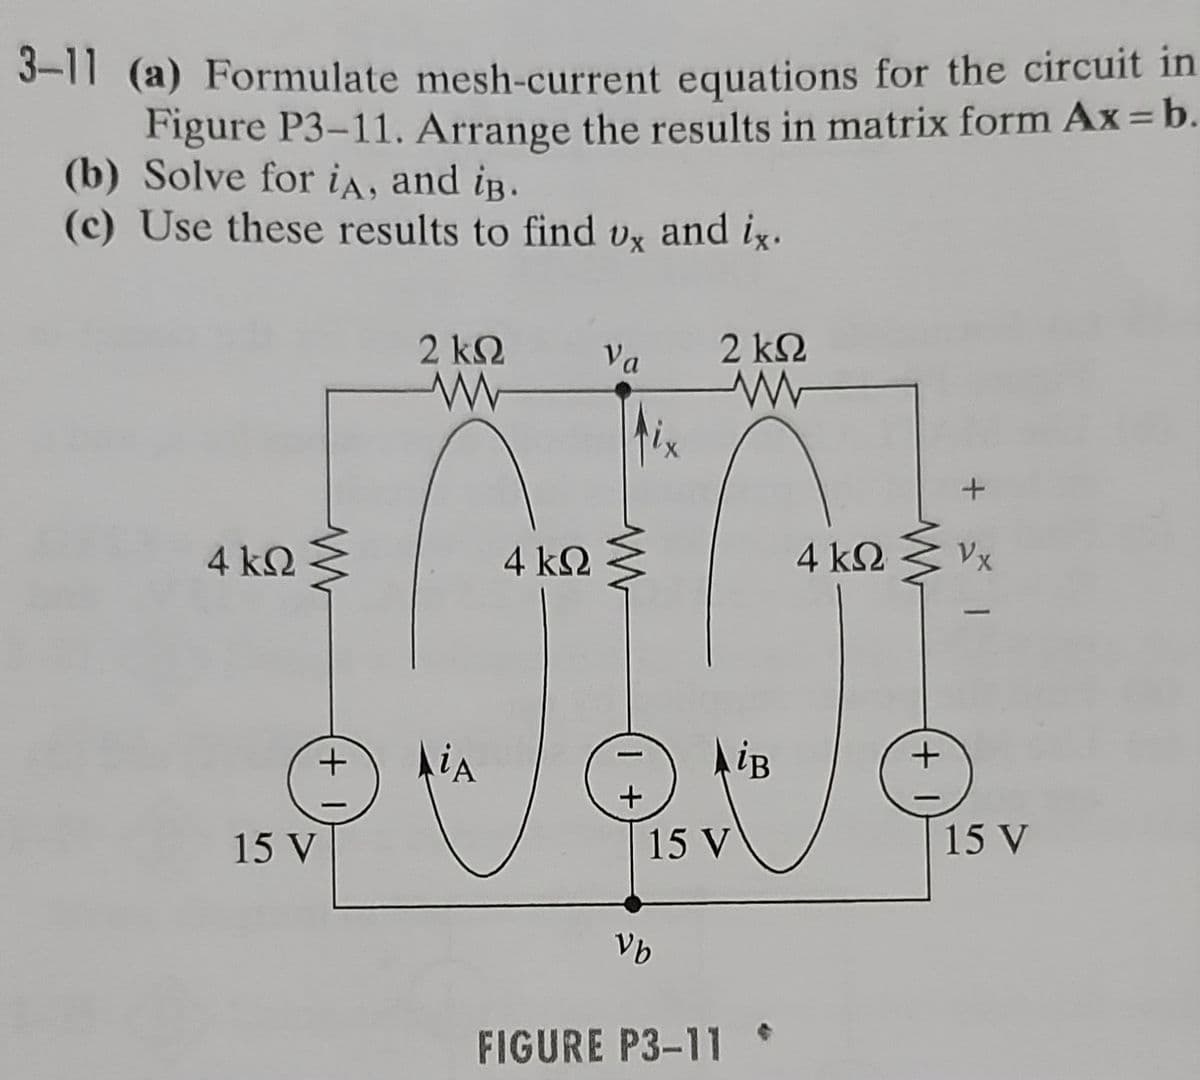 3-11 (a) Formulate mesh-current equations for the circuit in
Figure P3-11. Arrange the results in matrix form Ax = b.
(b) Solve for iA, and iB.
(c) Use these results to find vx and ix.
4 ΚΩ
+1
15 V
2 ΚΩ
AiA
4 ΚΩ
Va
www
1 +
Vb
2 ΚΩ
www
AiB
15 V
FIGURE P3-11
4 ΚΩ
+
+ 1
Vx
15 V